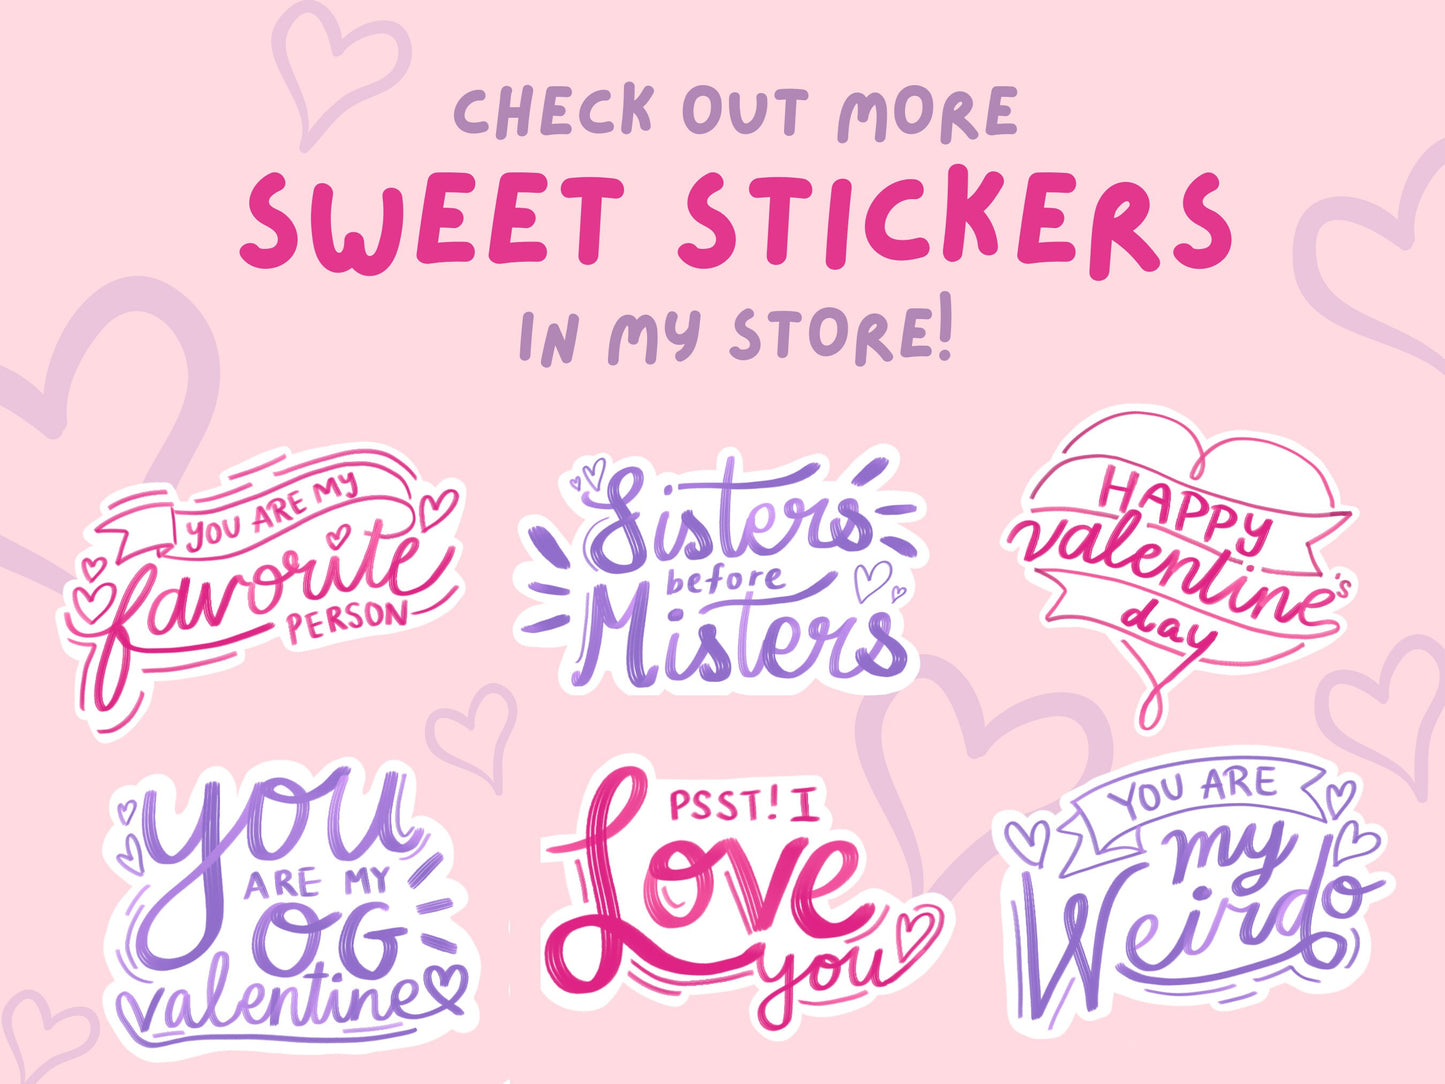 Hey I Love You Sticker Pack | Anniversary Gifts | Love Stickers